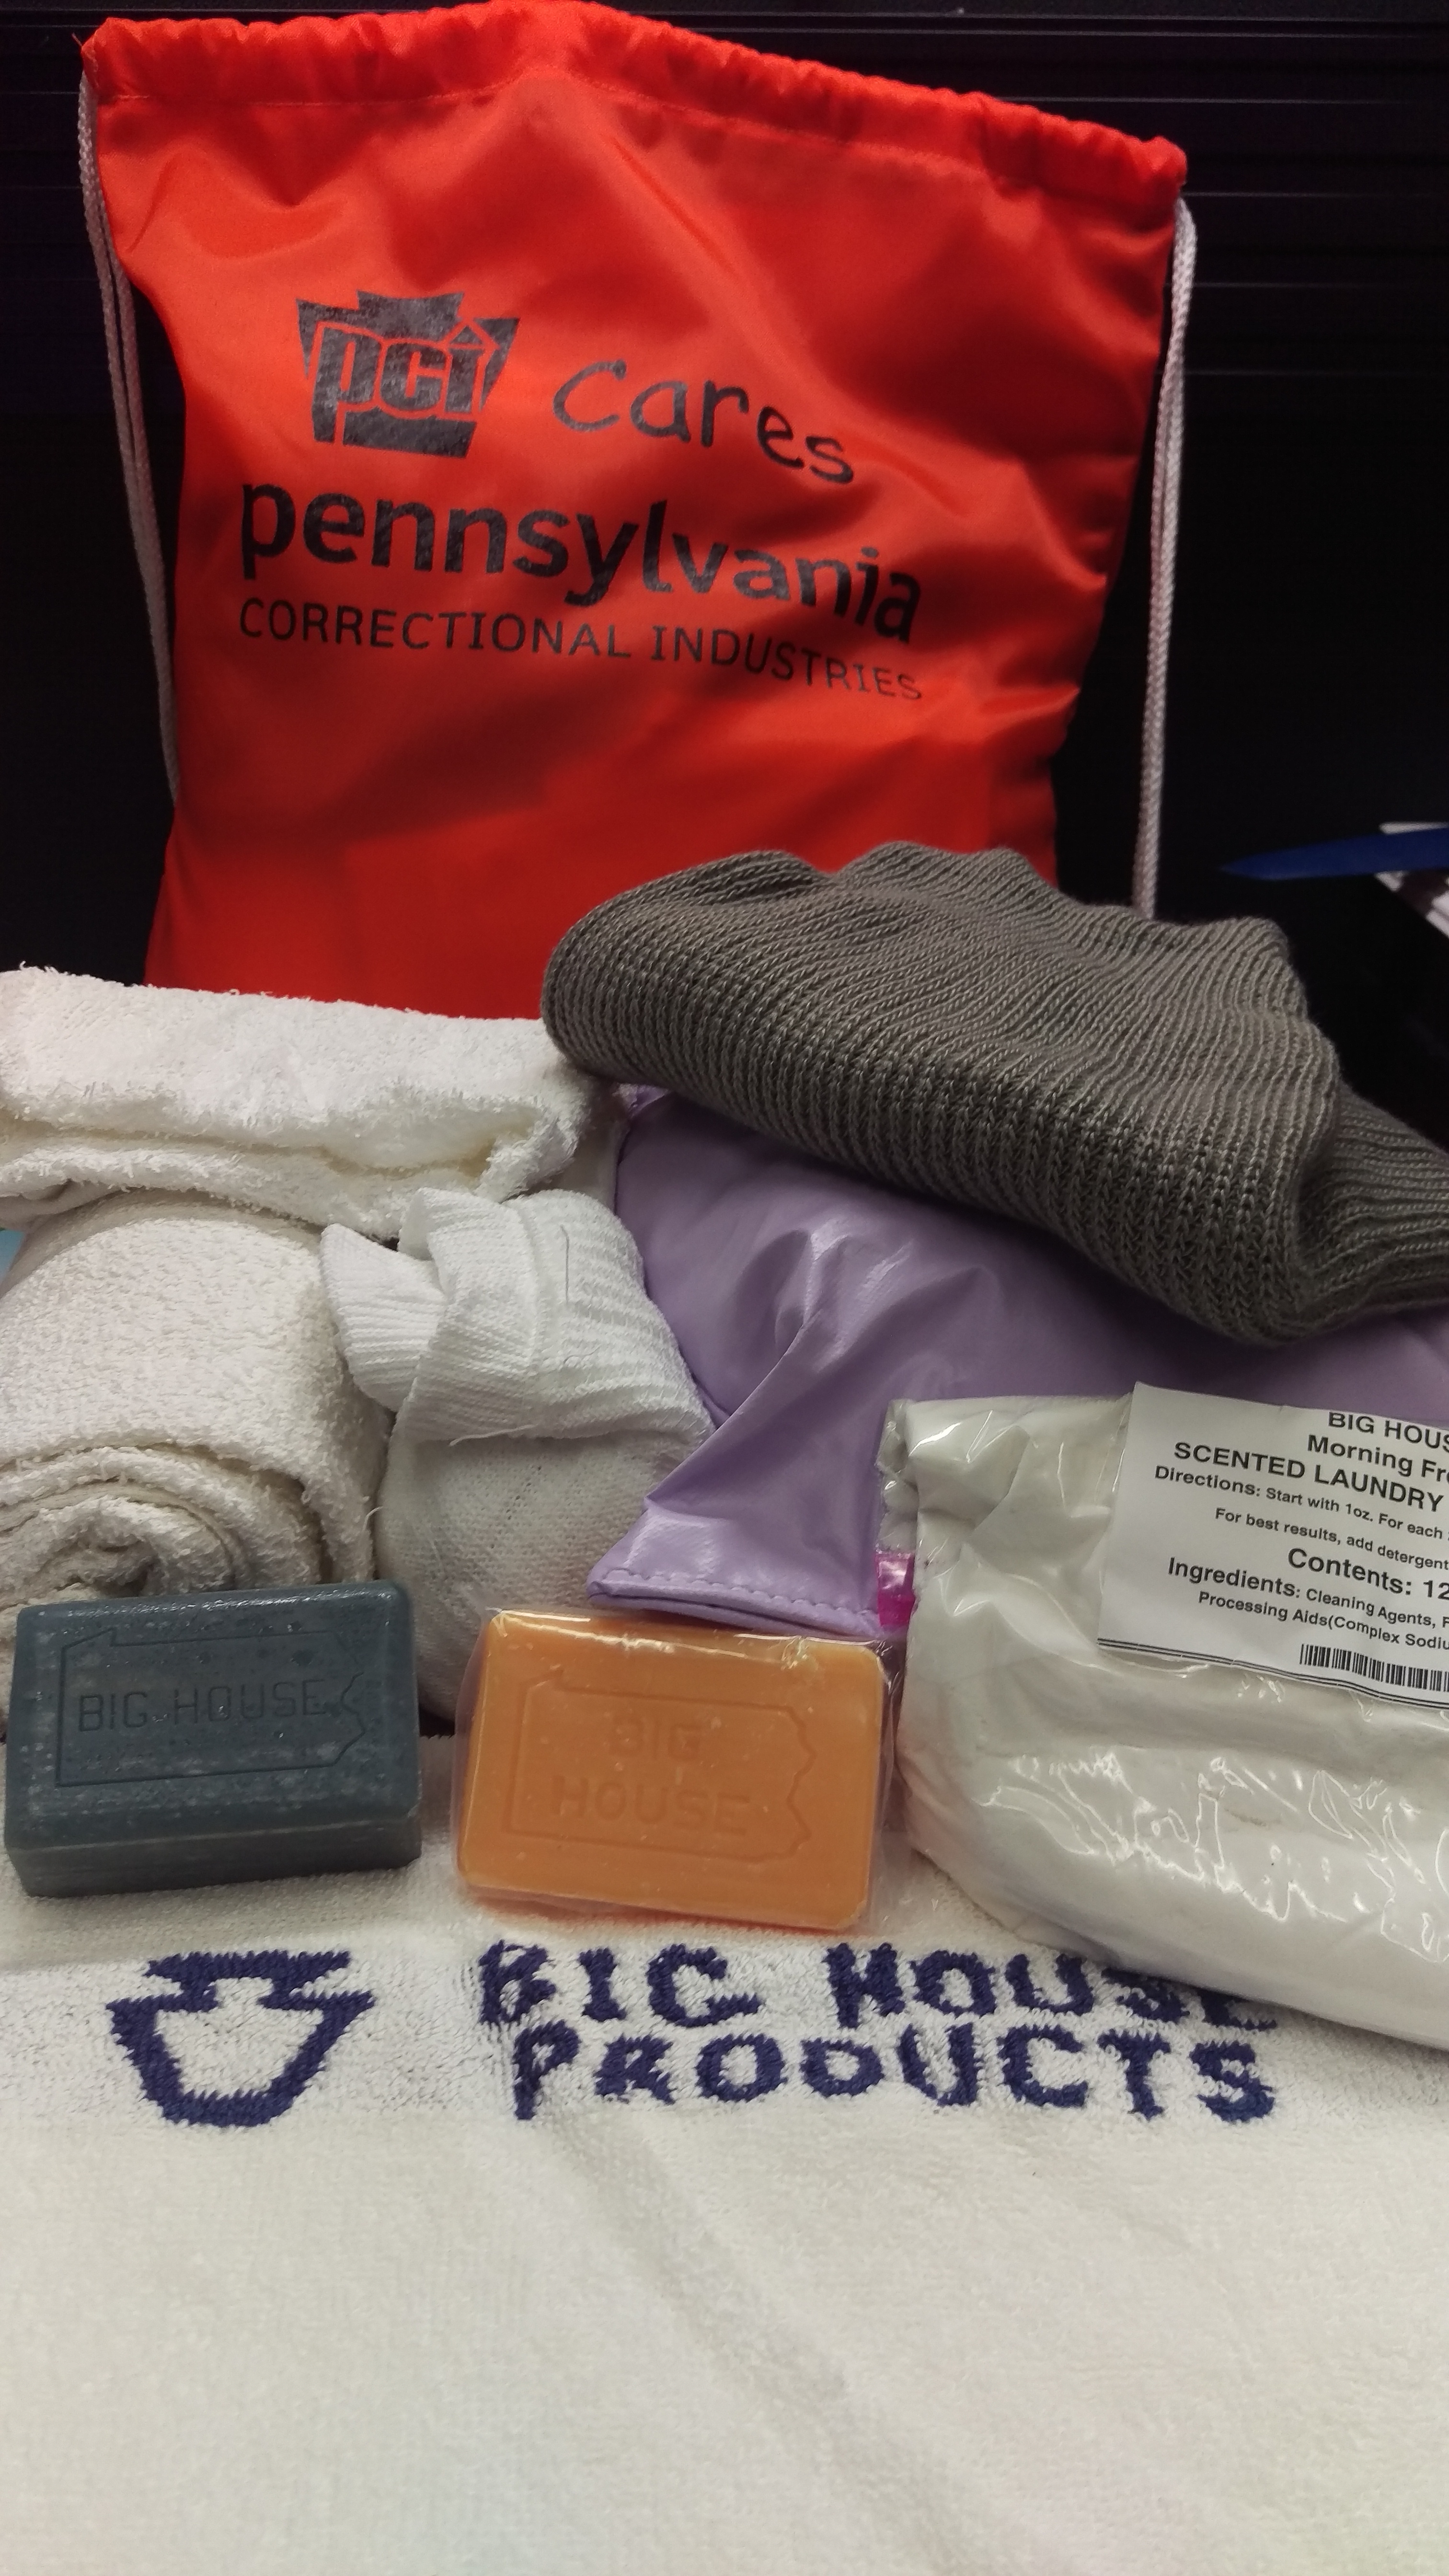 Assorted items made by Pennsylvania Correctional Industries, including towels, soap and a bag.